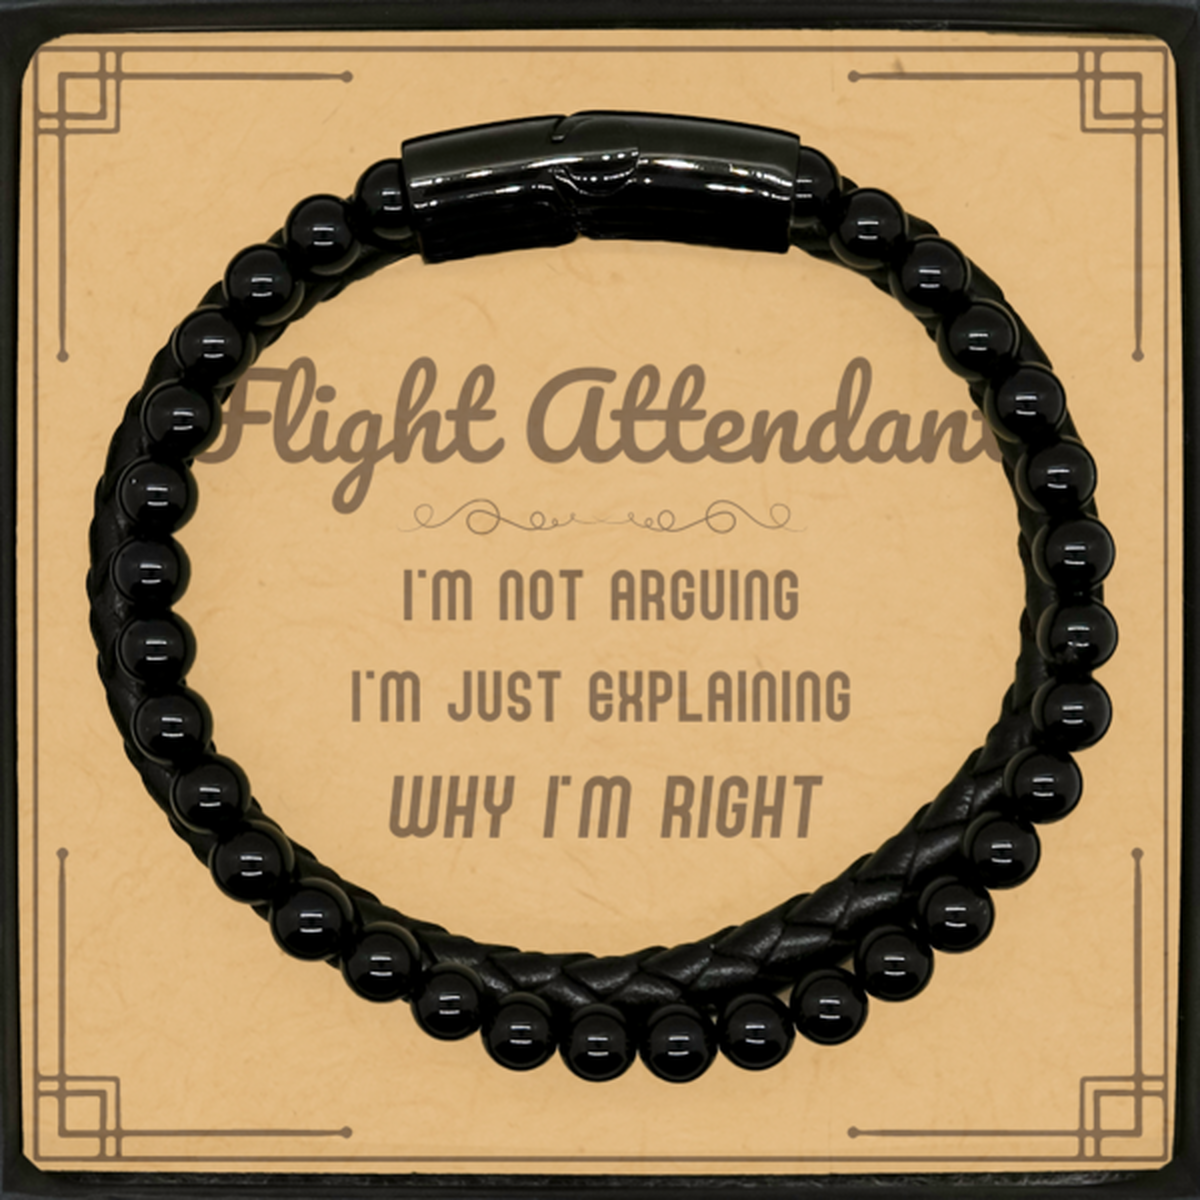 Flight Attendant I'm not Arguing. I'm Just Explaining Why I'm RIGHT Stone Leather Bracelets, Funny Saying Quote Flight Attendant Gifts For Flight Attendant Message Card Graduation Birthday Christmas Gifts for Men Women Coworker